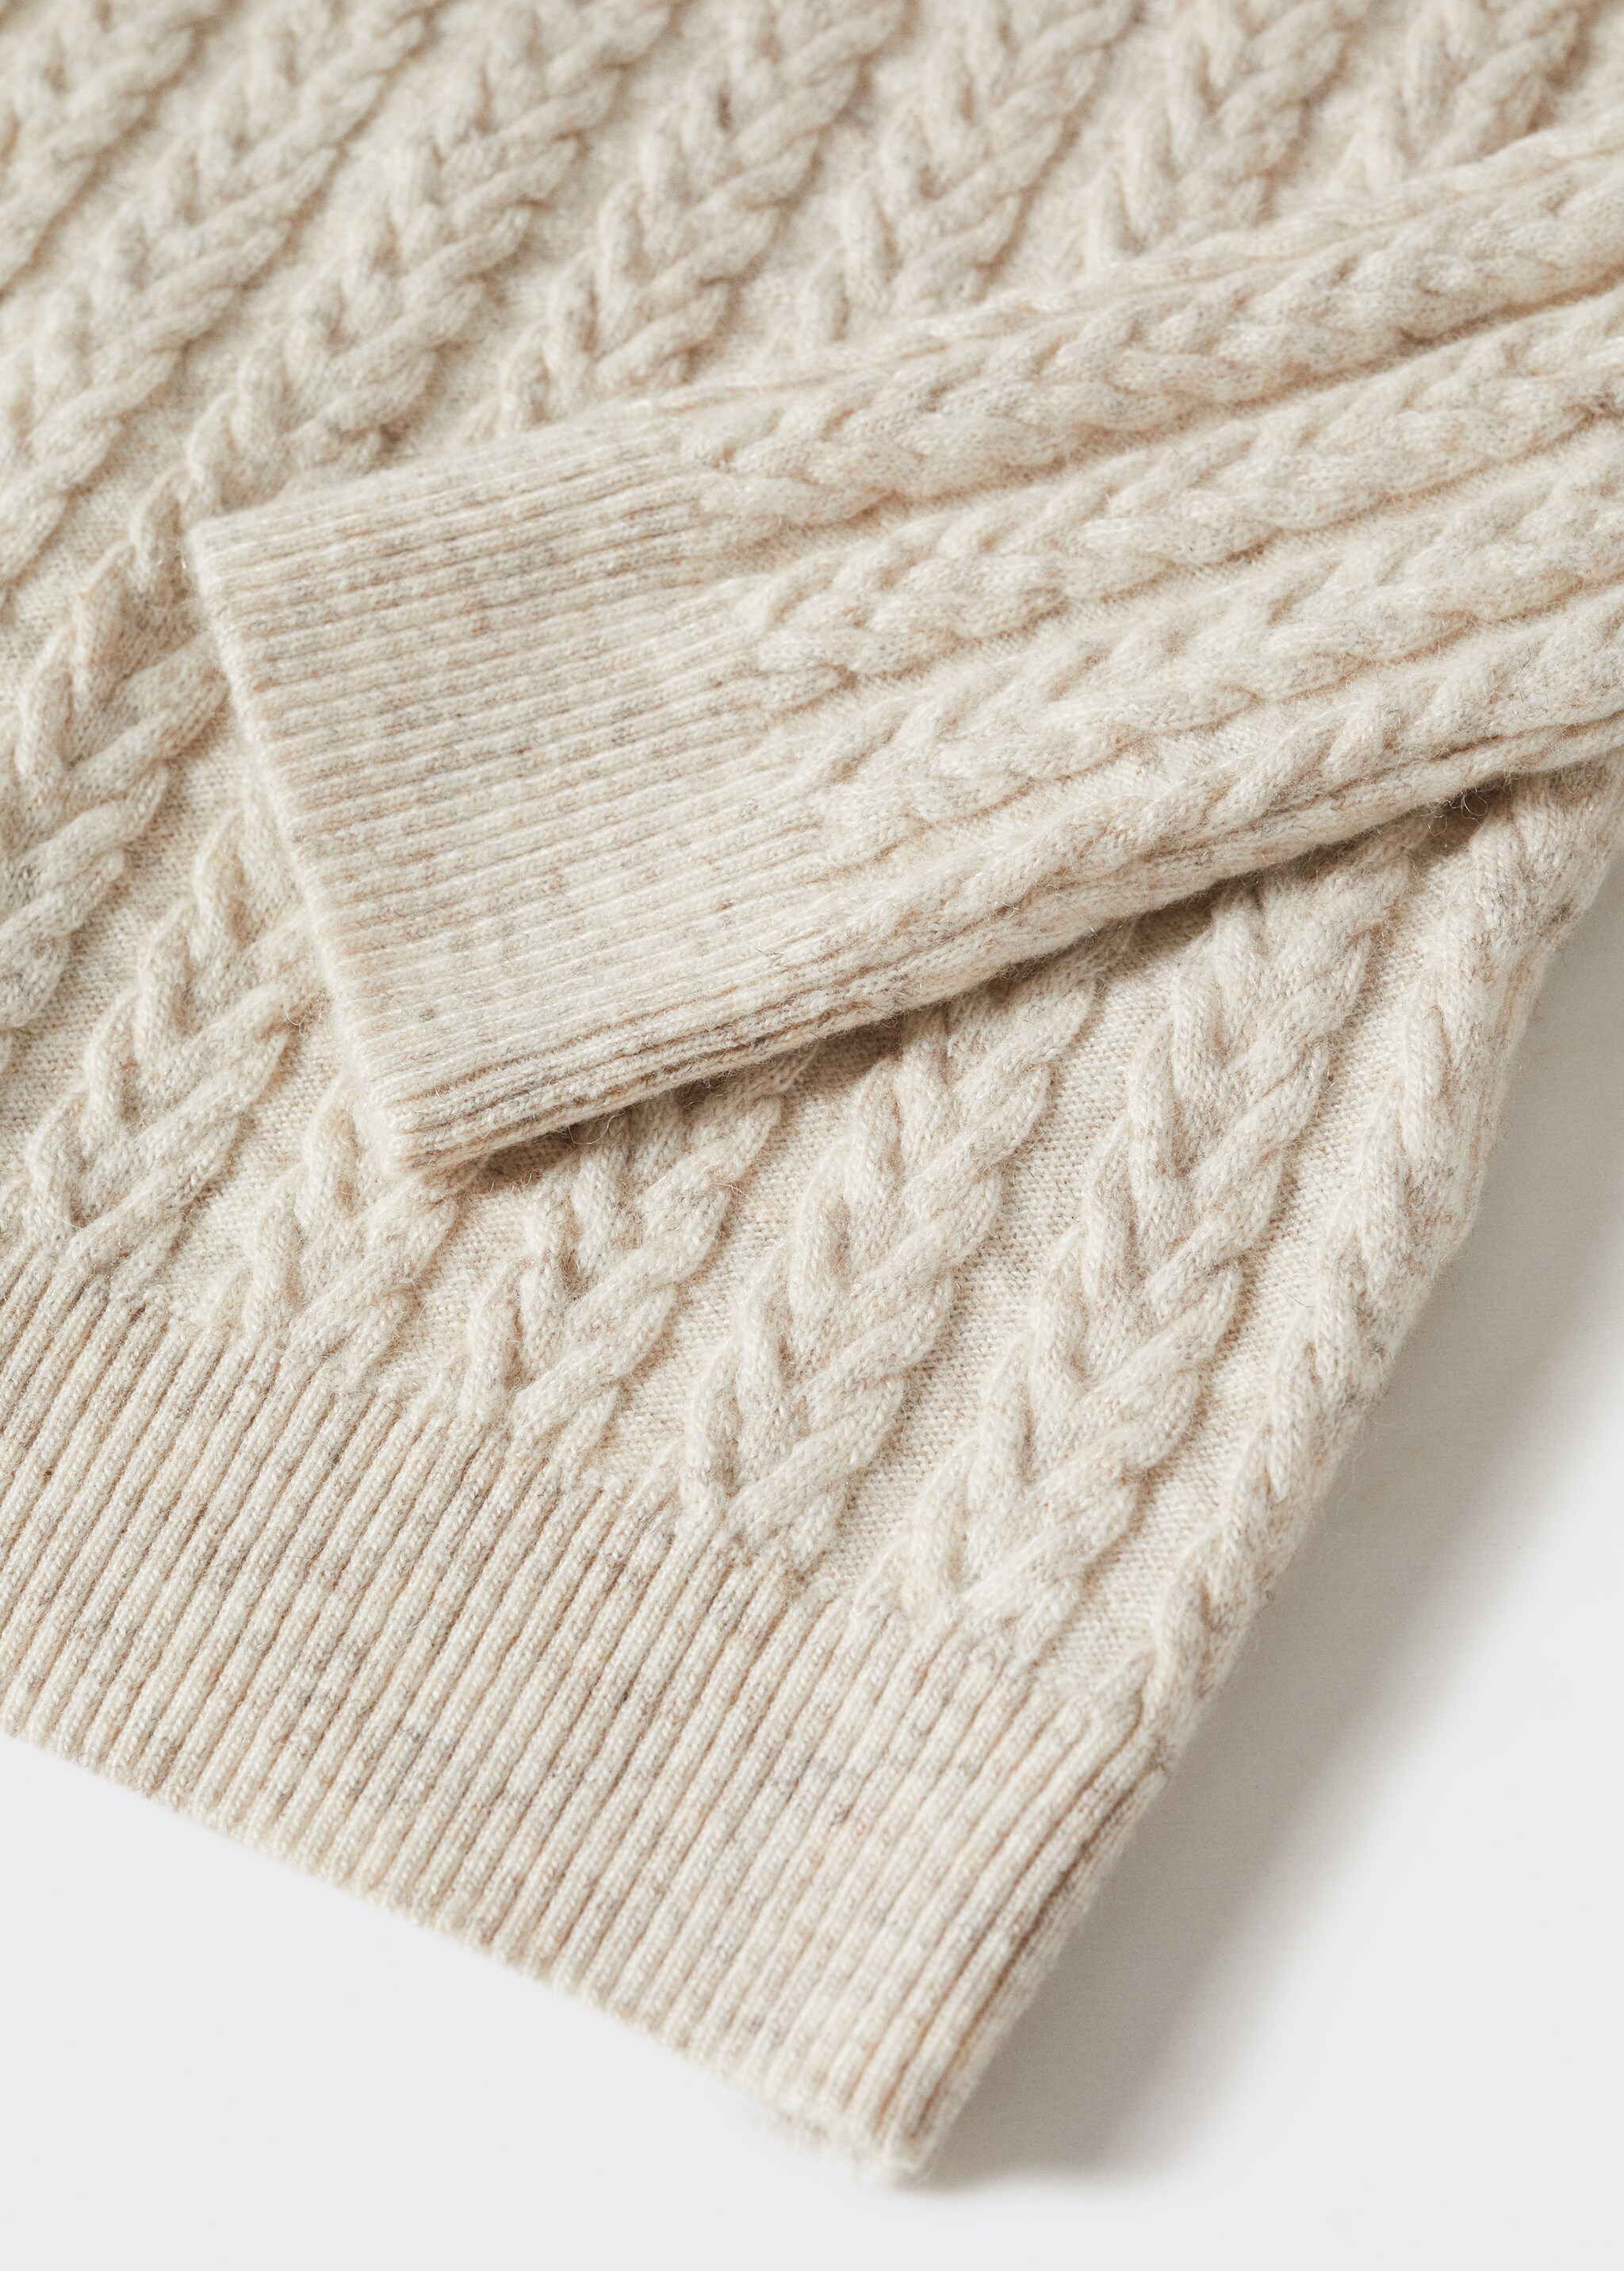 Cashmere wool sweater - Details of the article 8